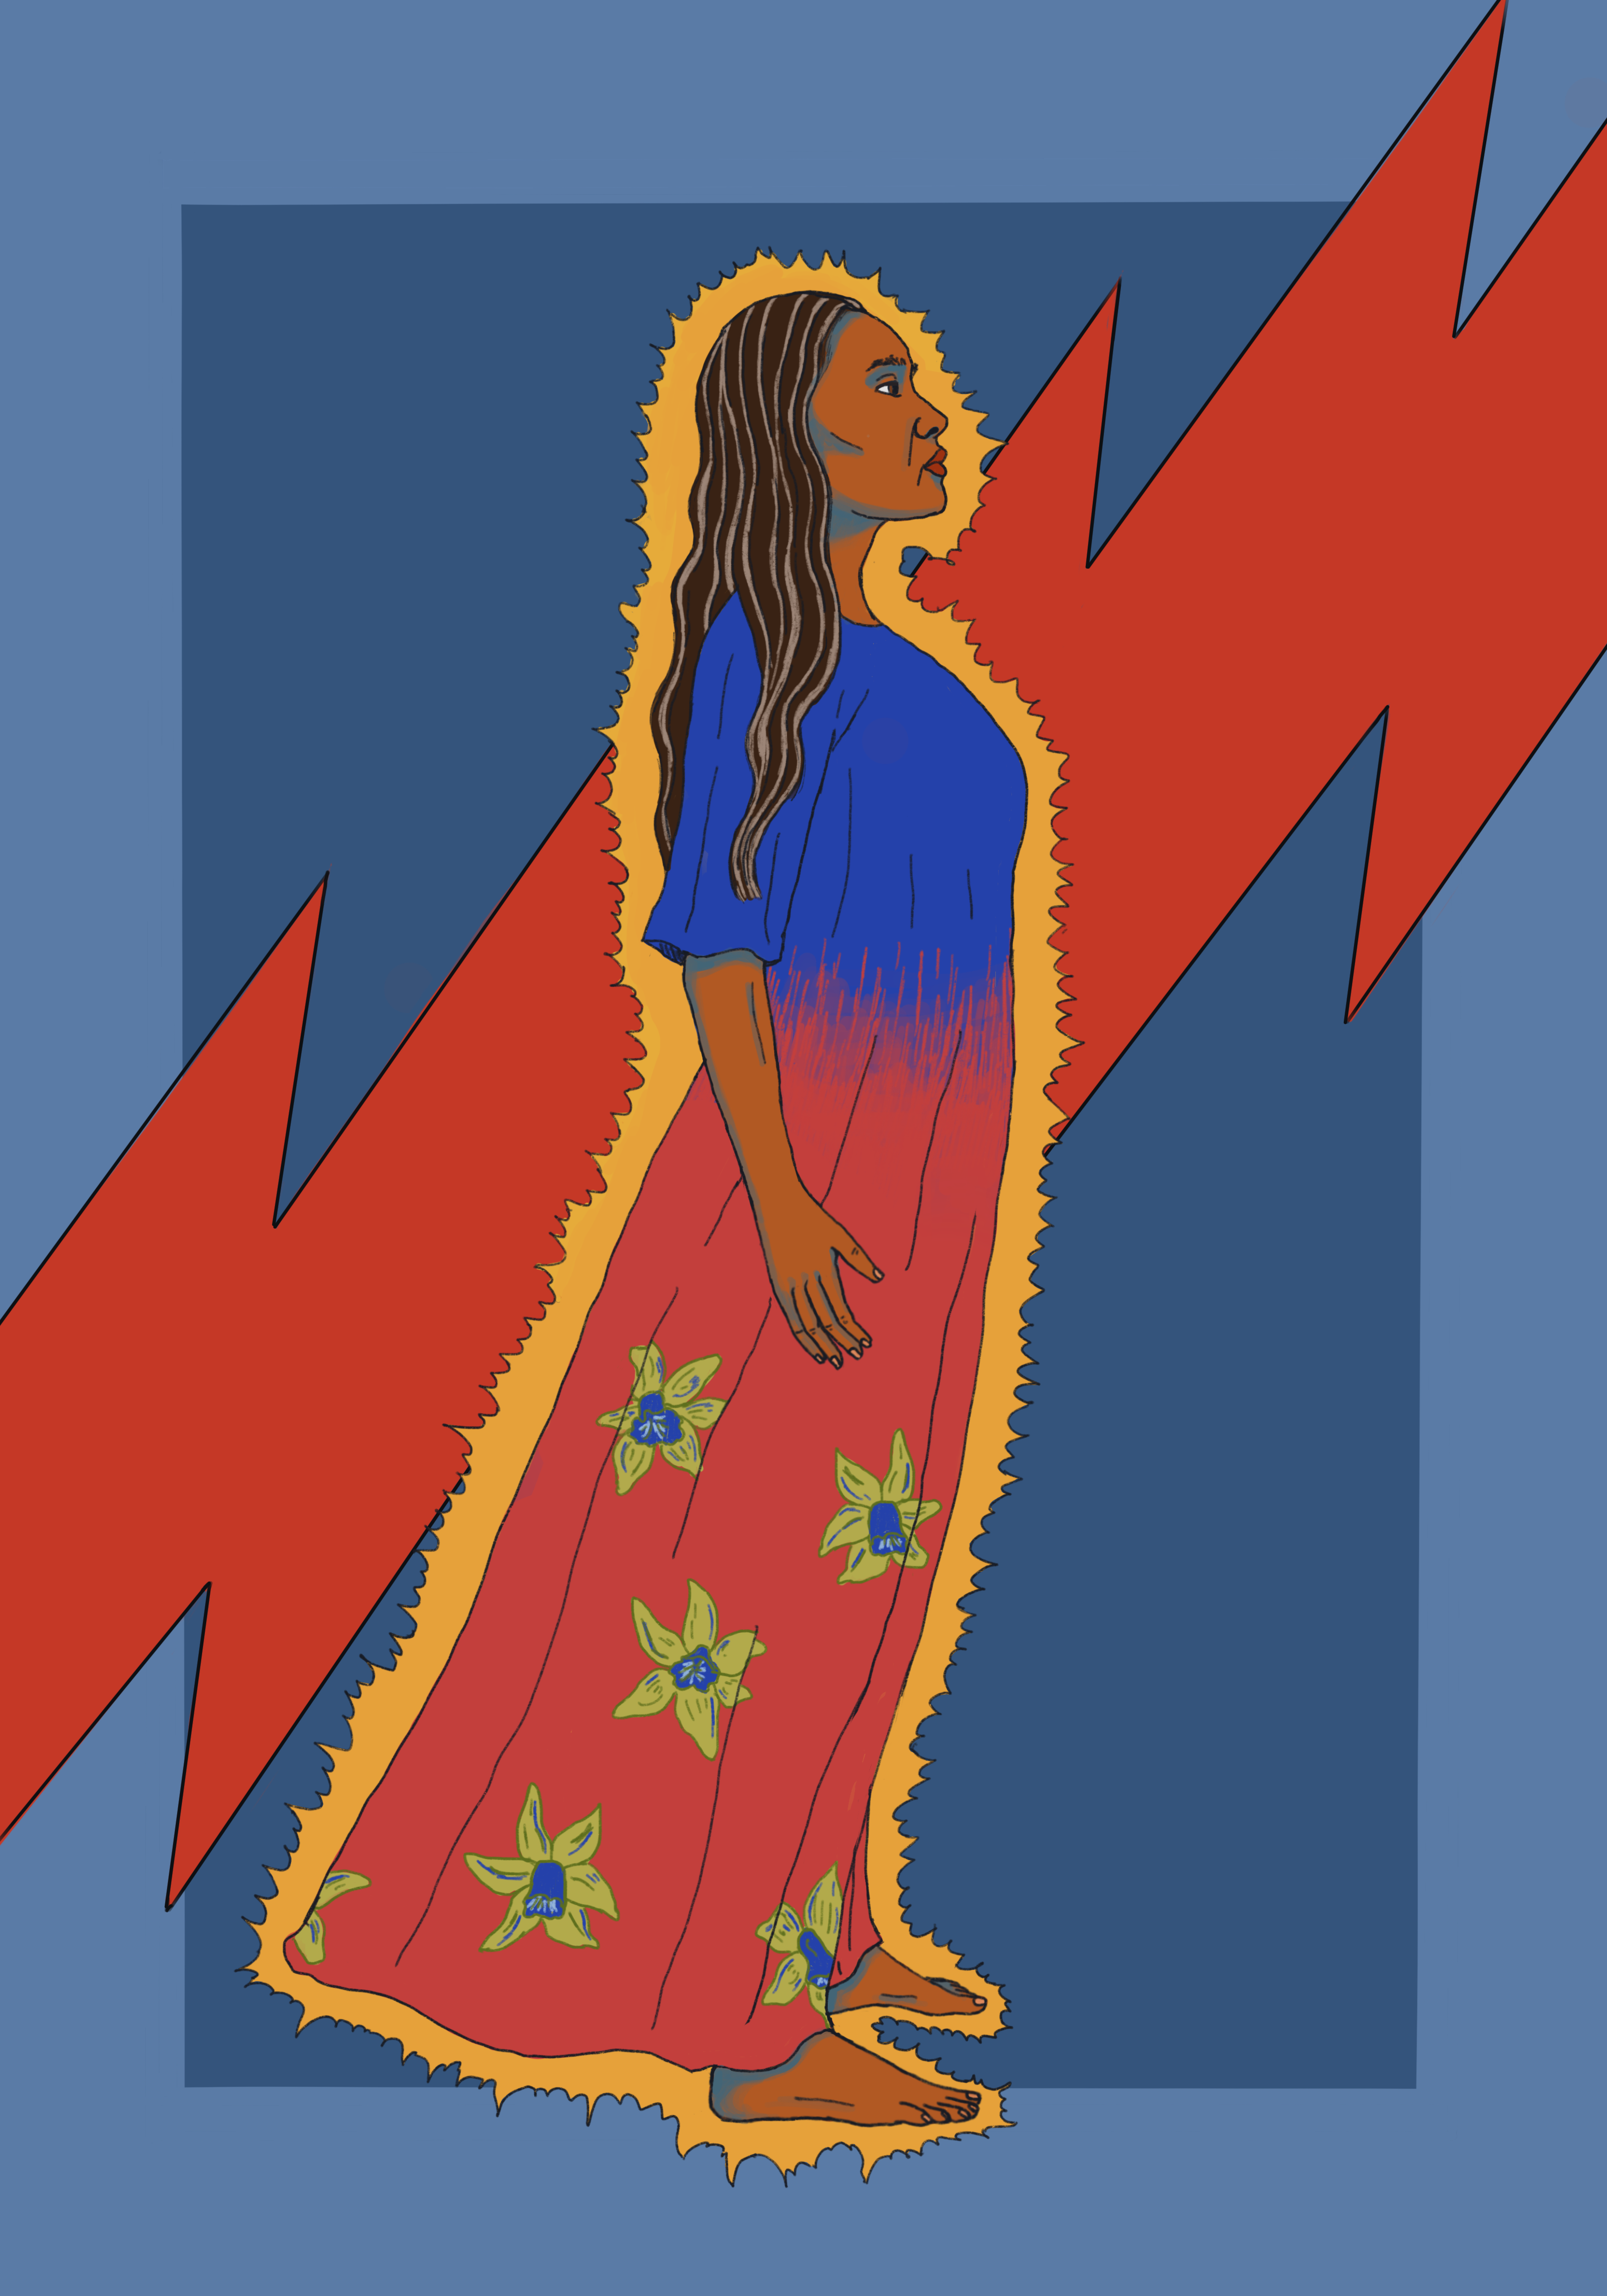 Illustration of woman standing sideways with yellow light surrounding her and a red lightning bolt behind her.